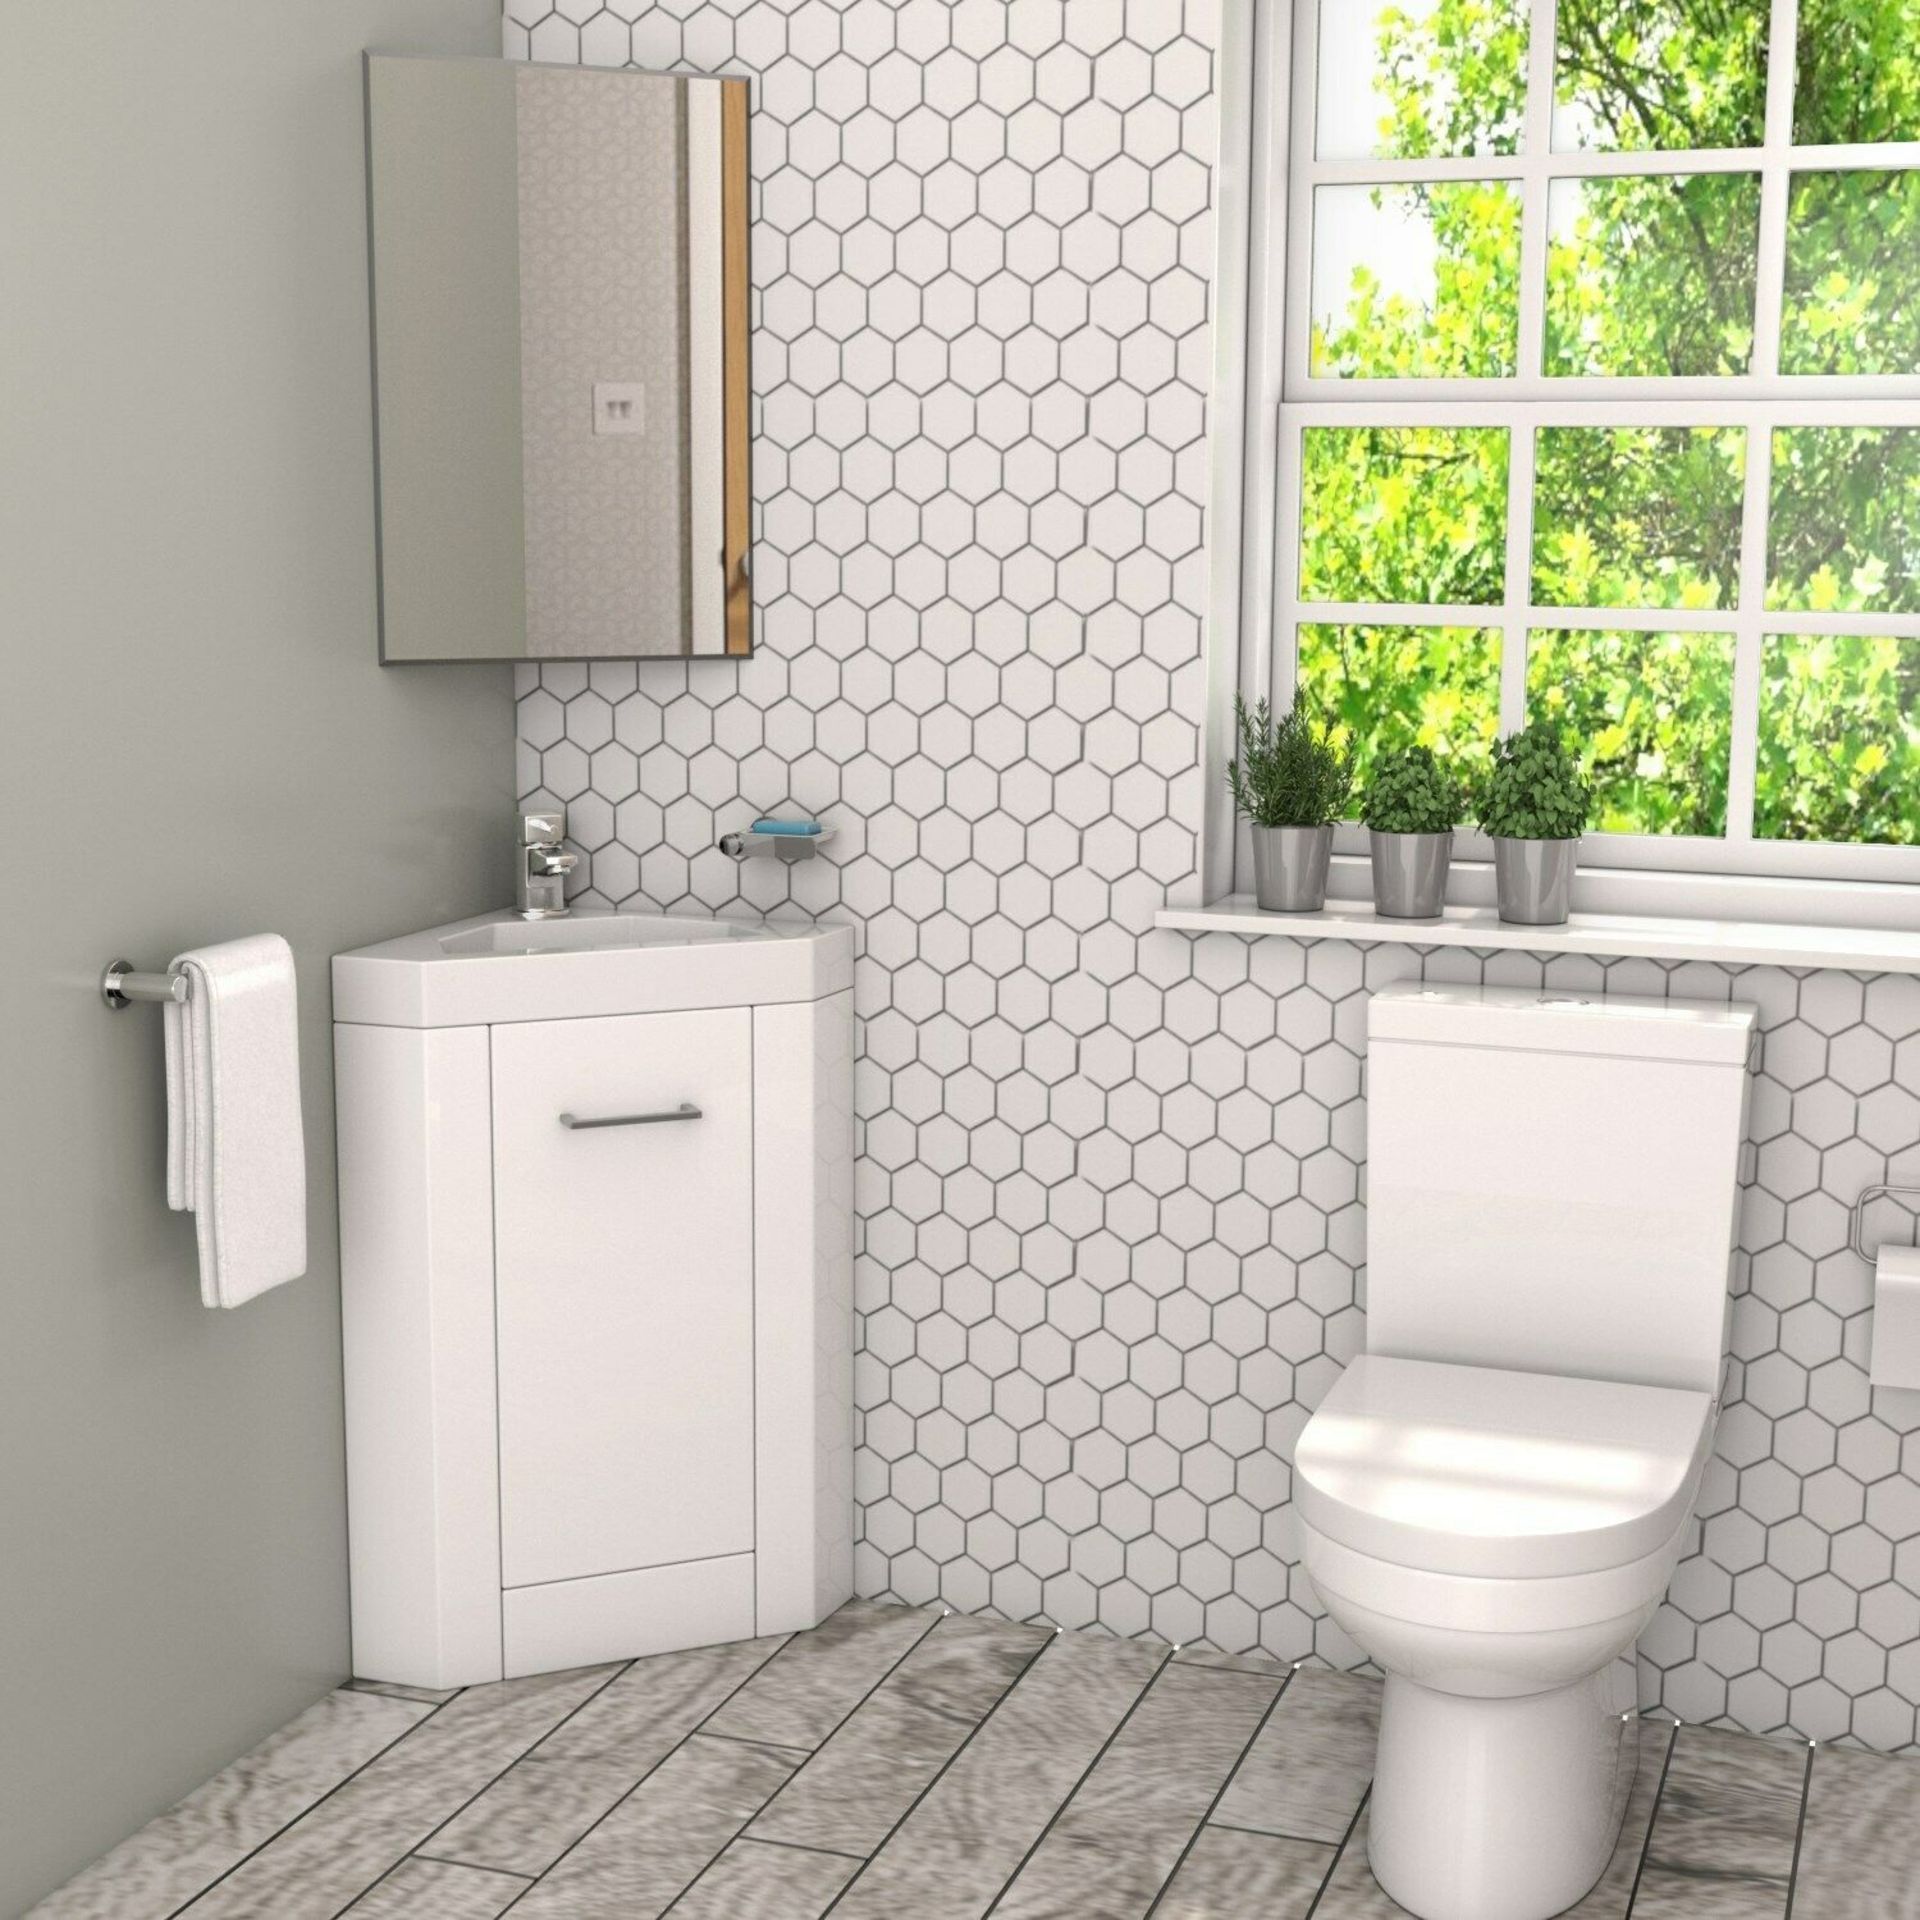 New & Boxed 400mm White Freestanding Vanity Unit With Basin - Apollo. RRP £394.99.Mv836V2.Cleverly - Image 2 of 2